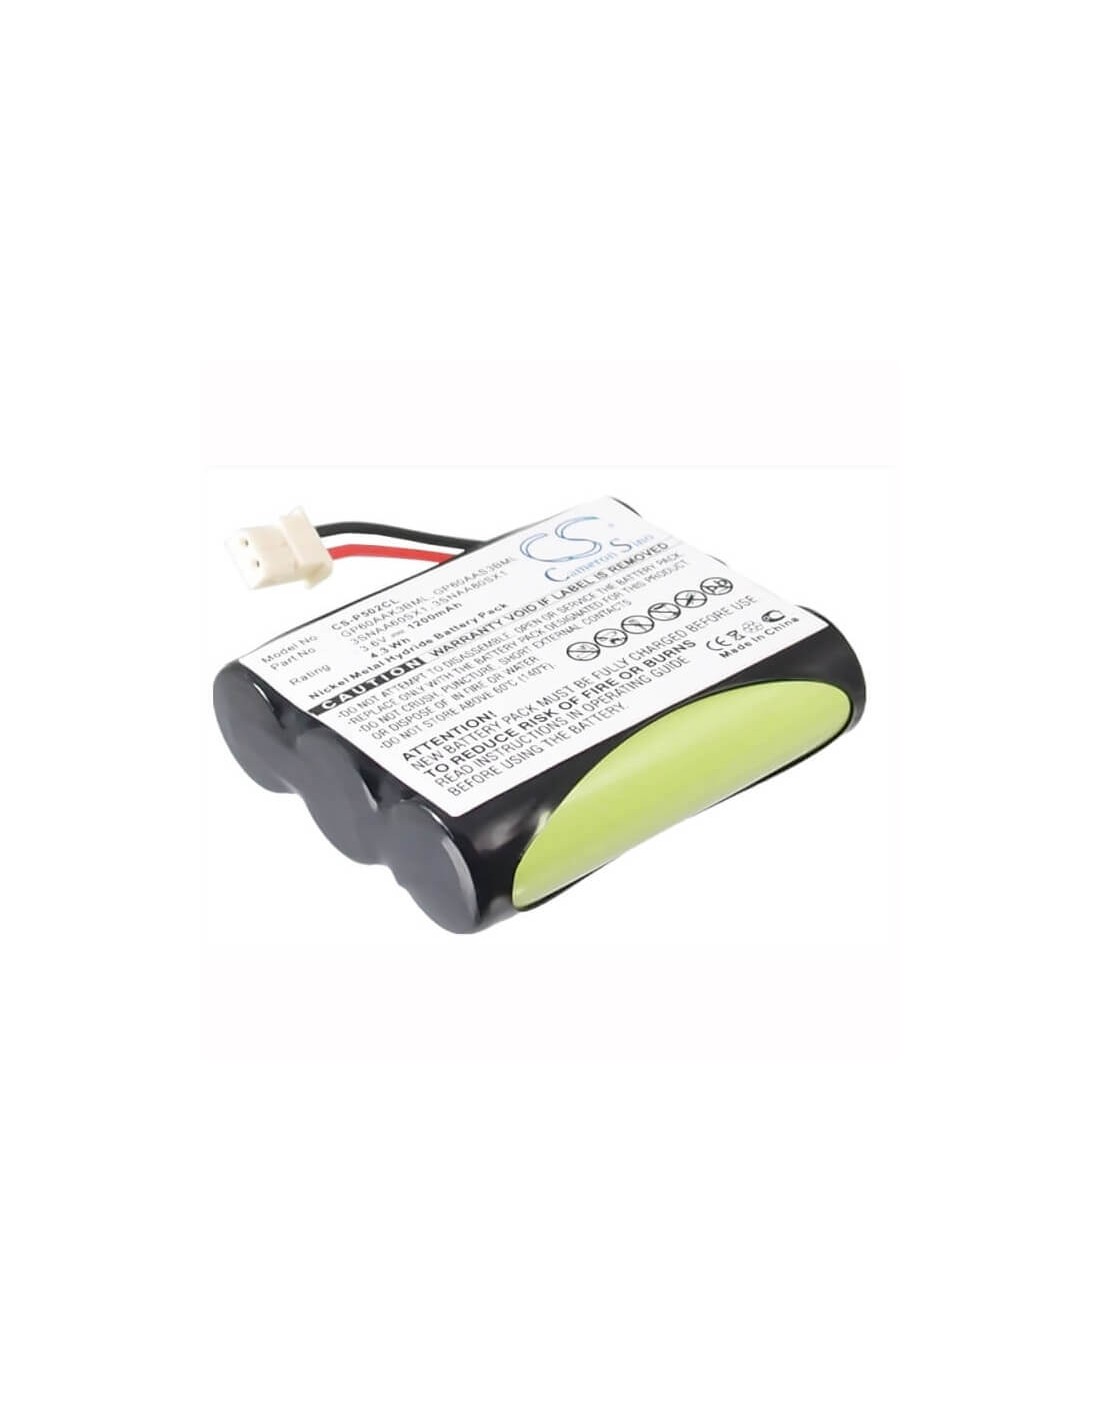 Battery for American, Cl40 3.6V, 1200mAh - 4.32Wh